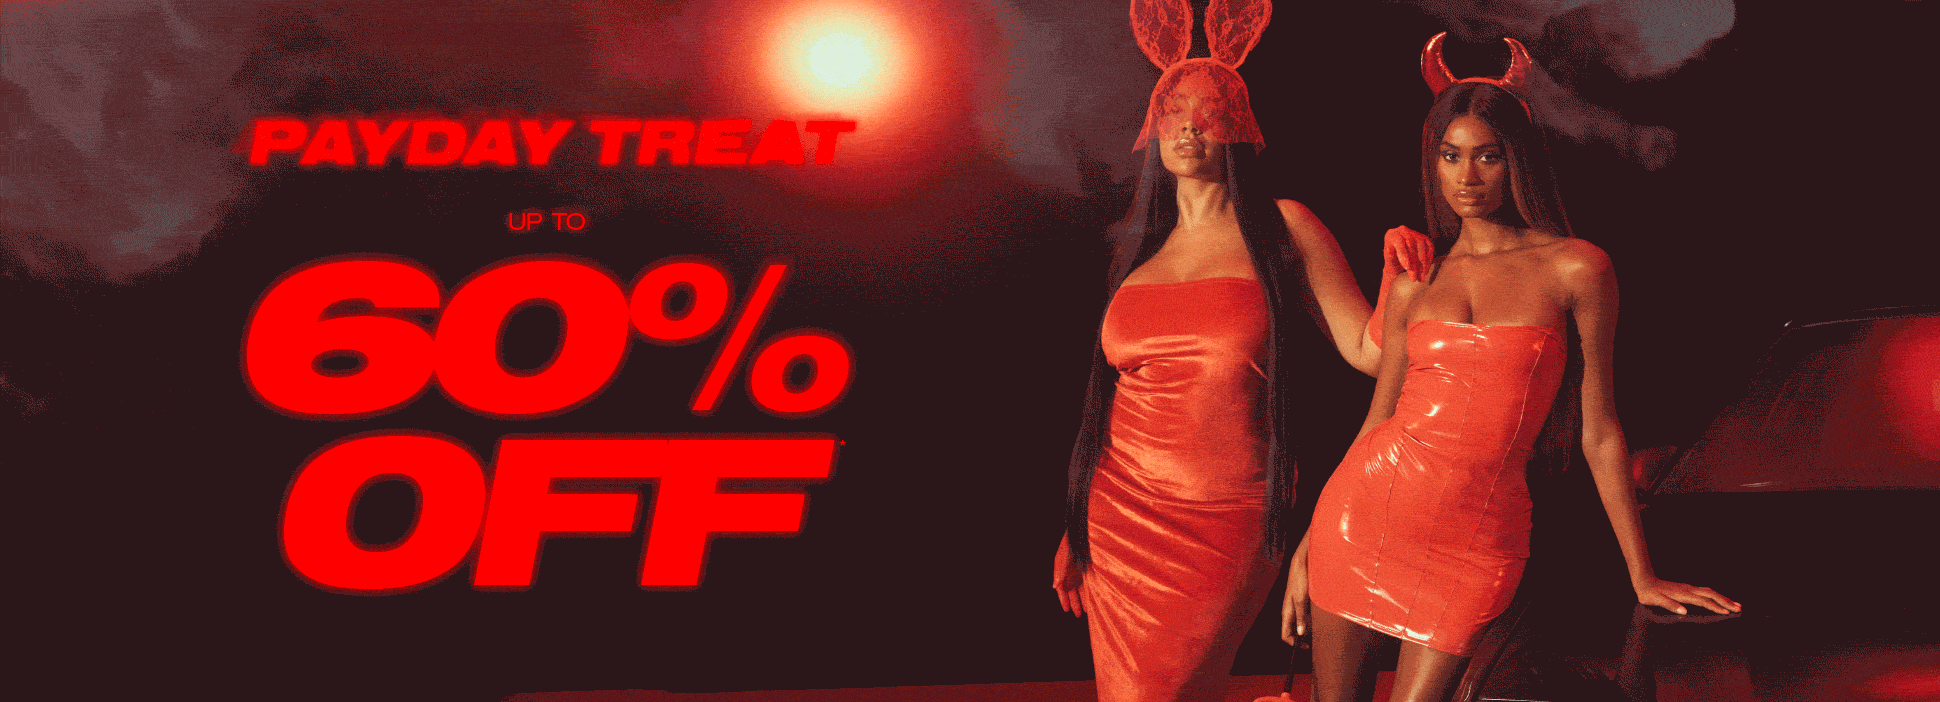 Up to 60% Off Autumn